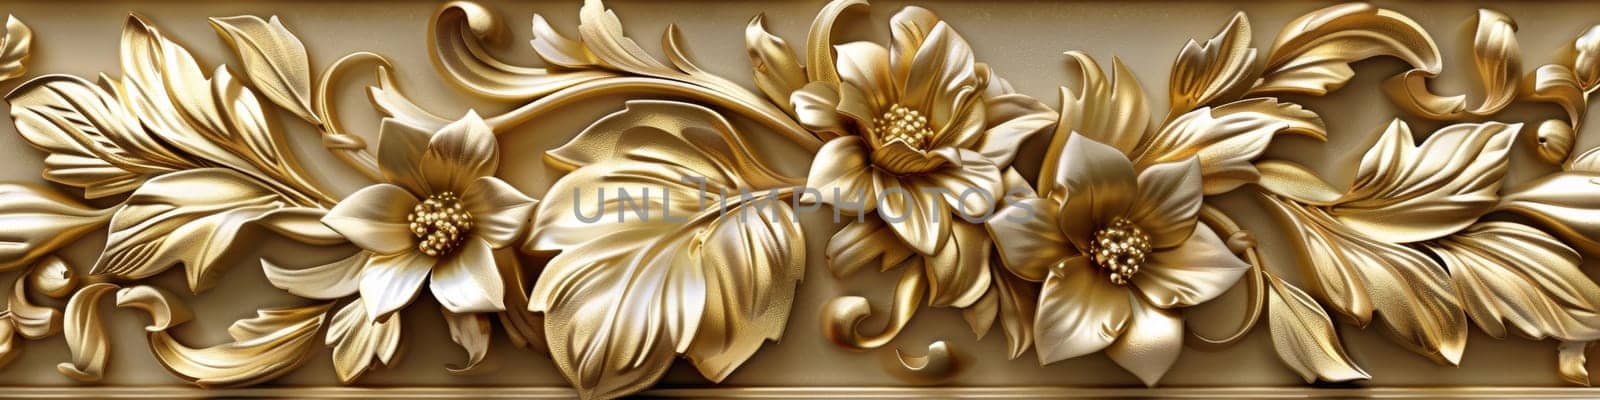 A close up of a decorative wall with gold flowers, AI by starush